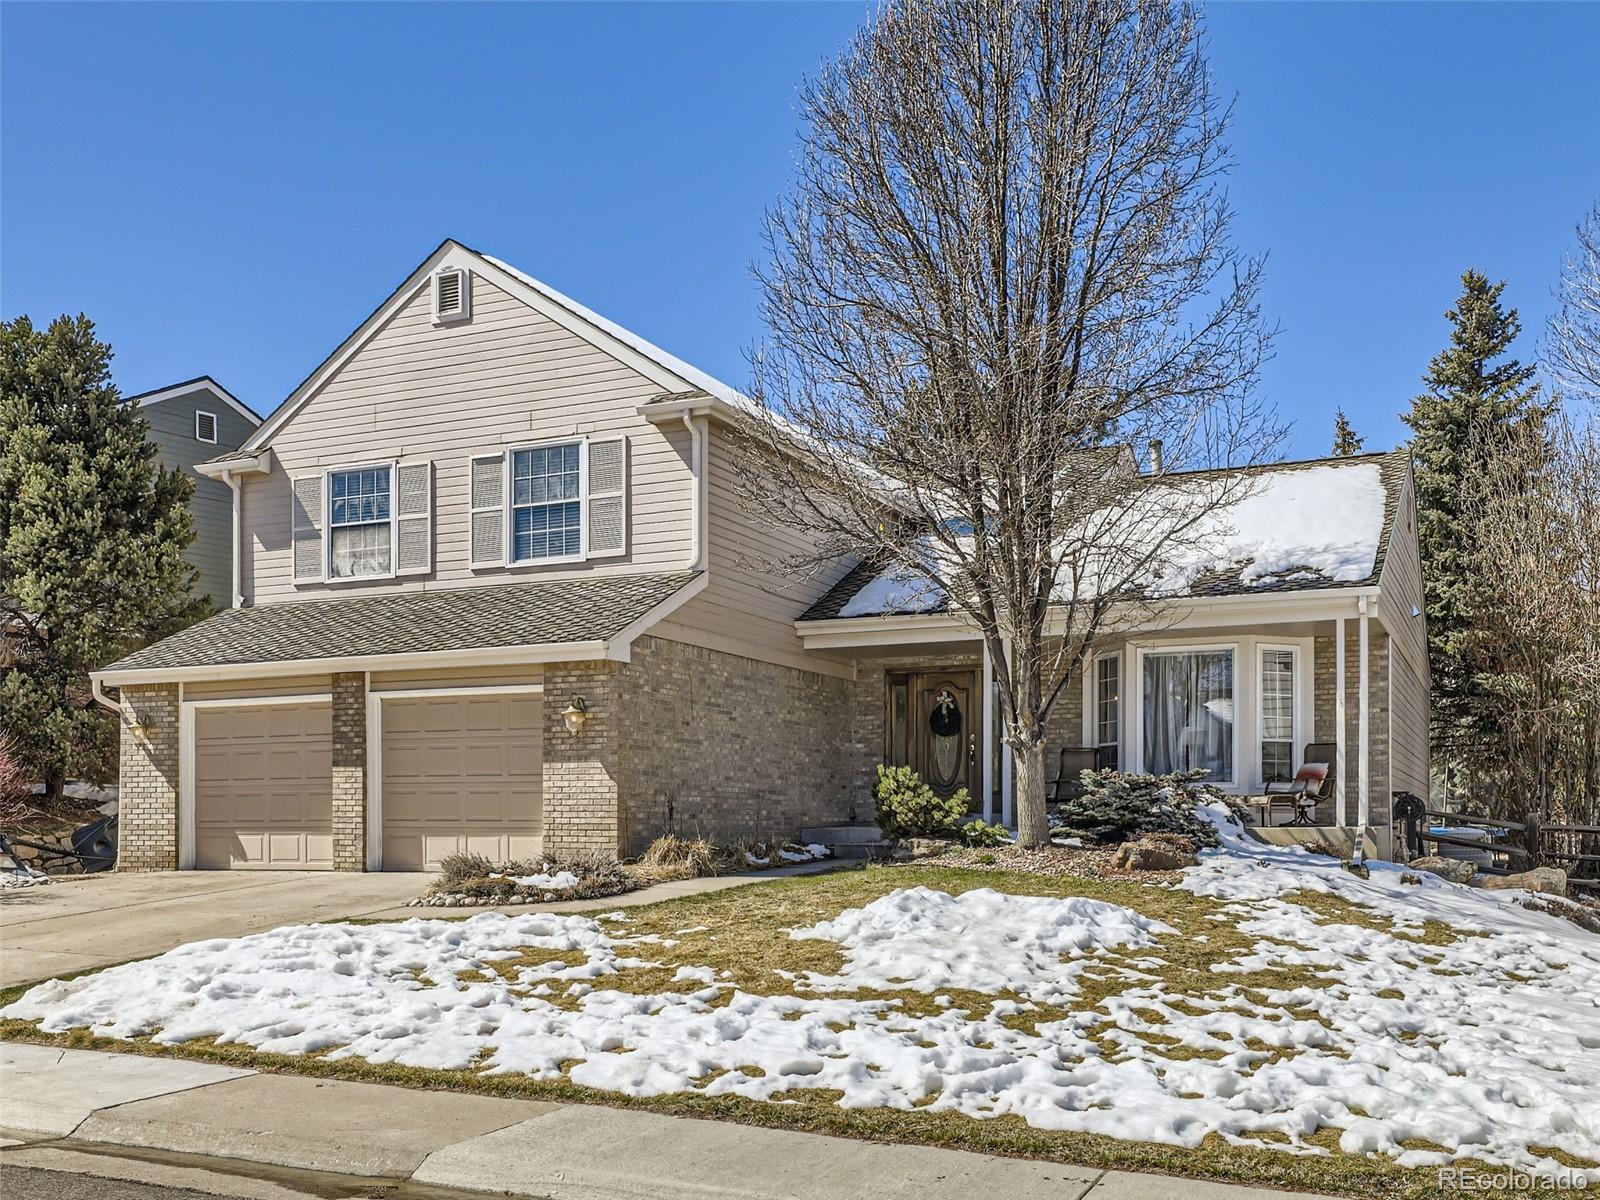 Report Image for 5371 S Garland Way,Littleton, Colorado